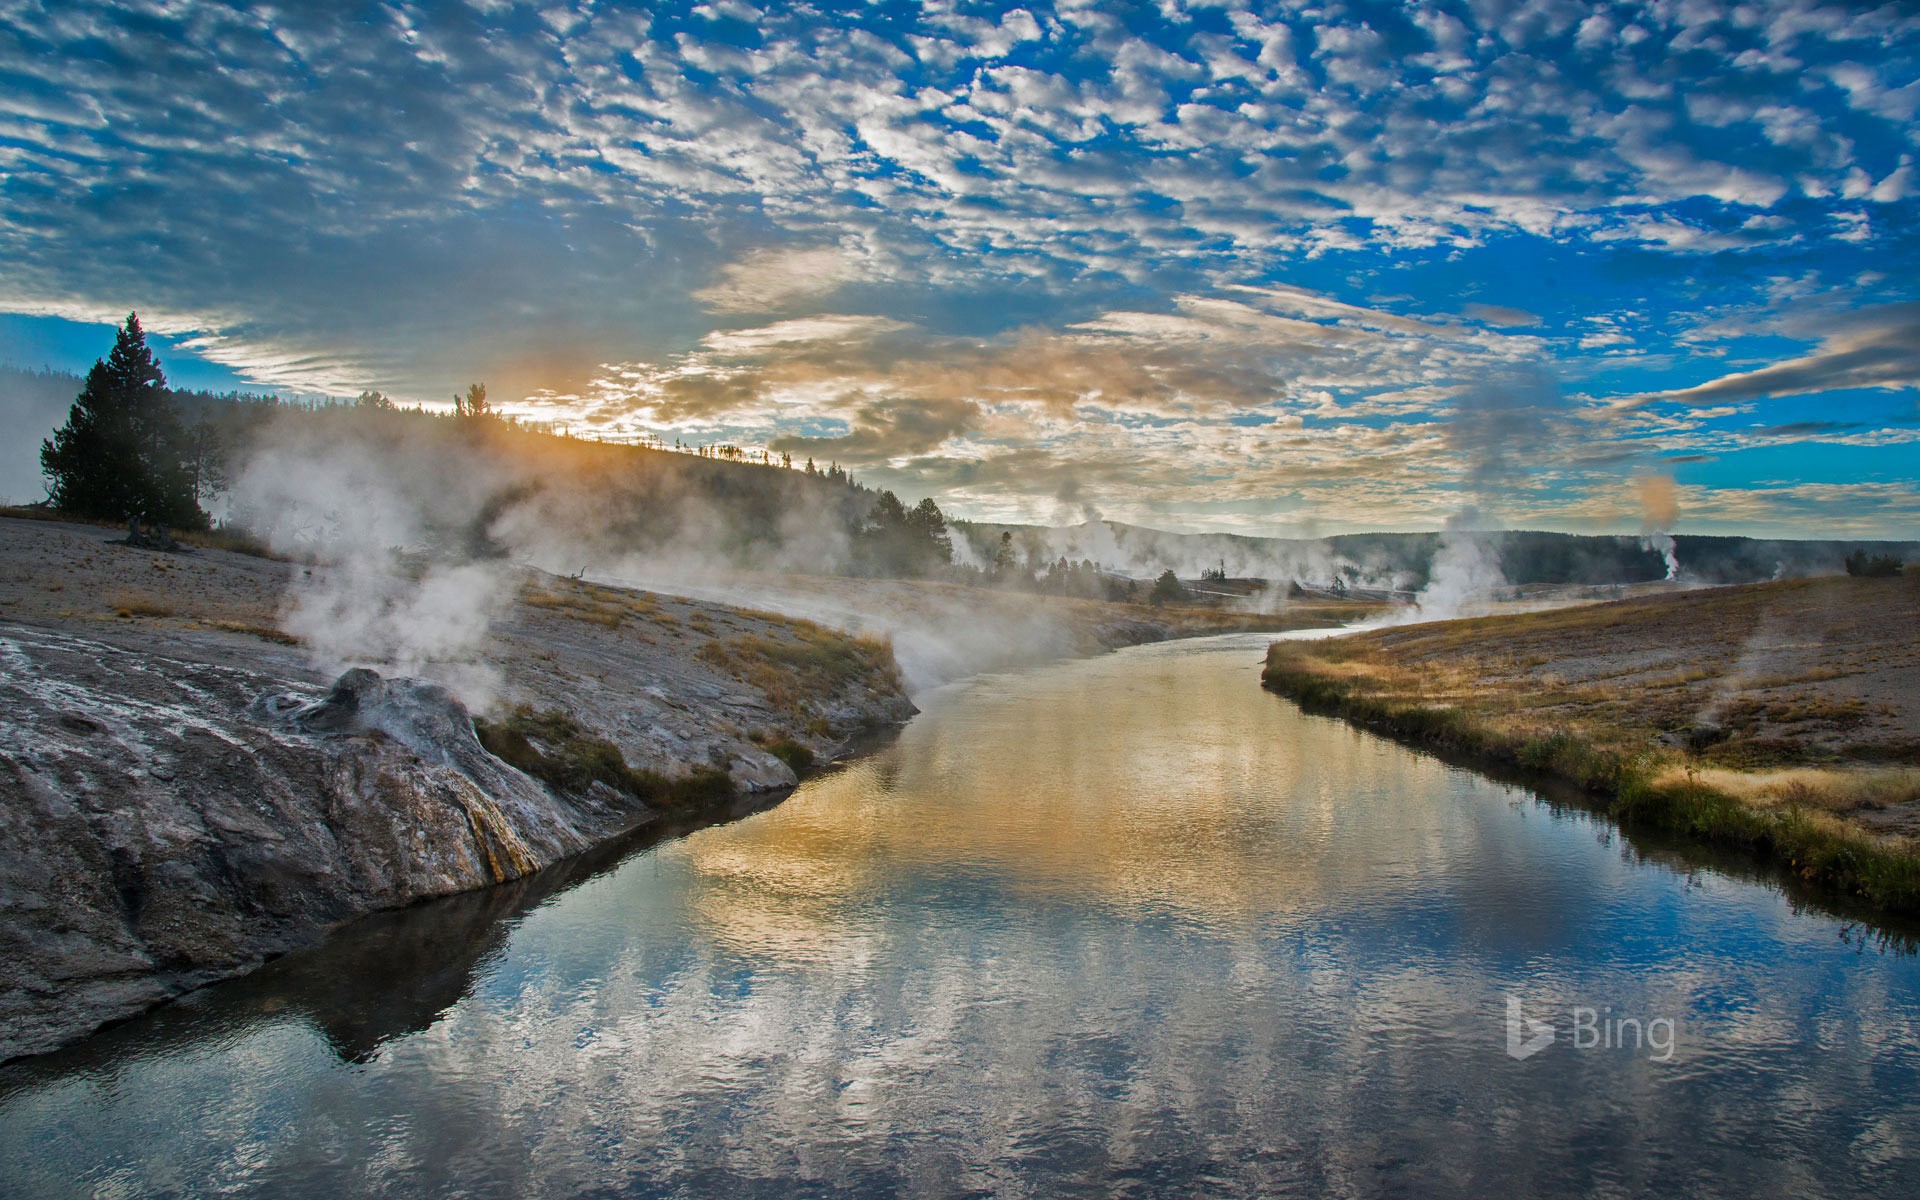 Firehole River in Yellowstone National Park, Wyoming, USA